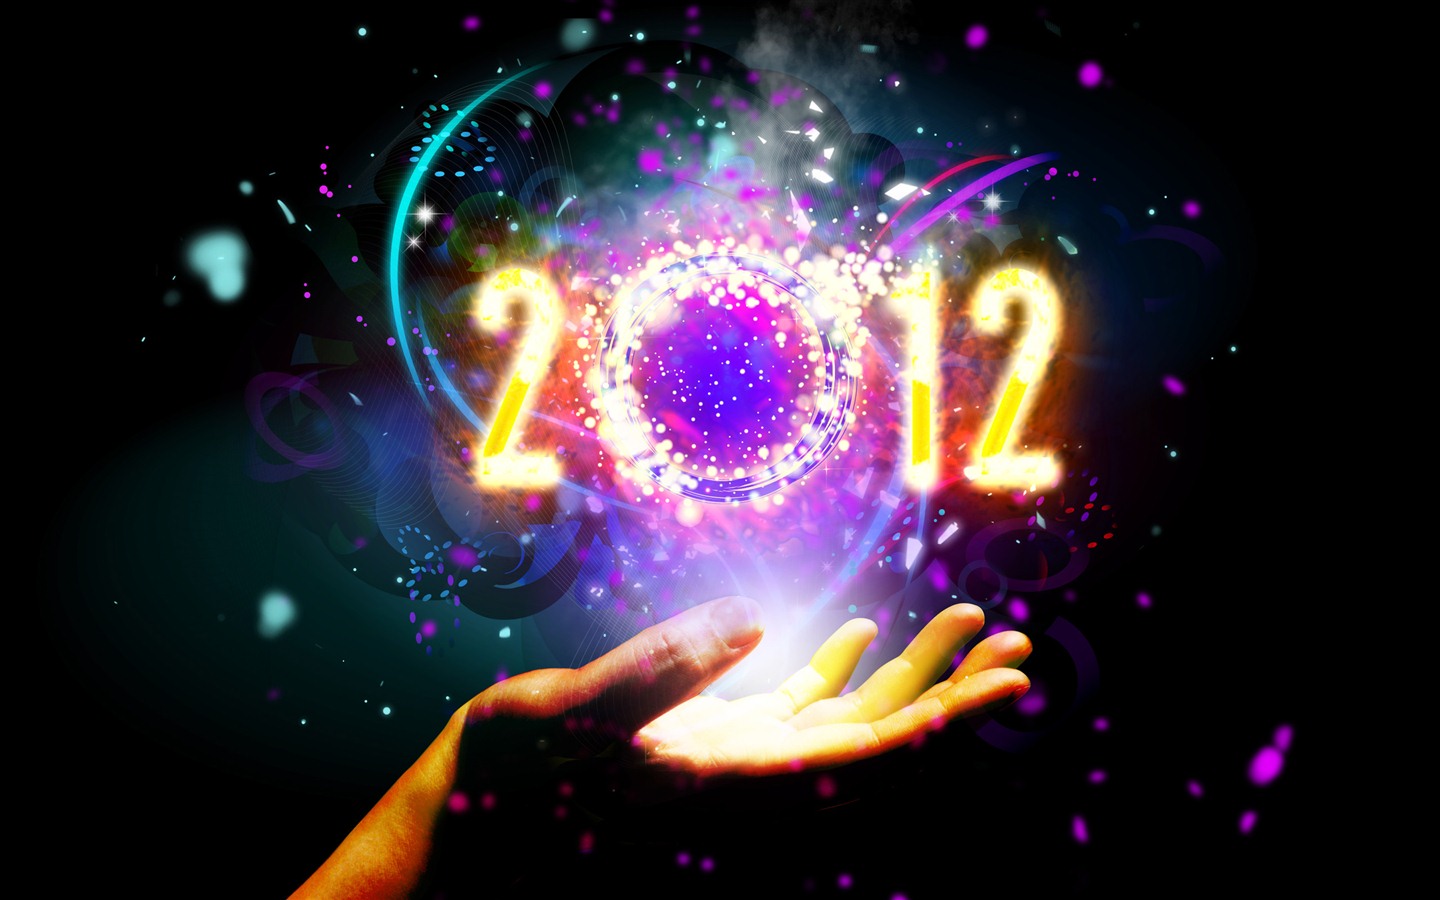 2012 New Year wallpapers (2) #12 - 1440x900